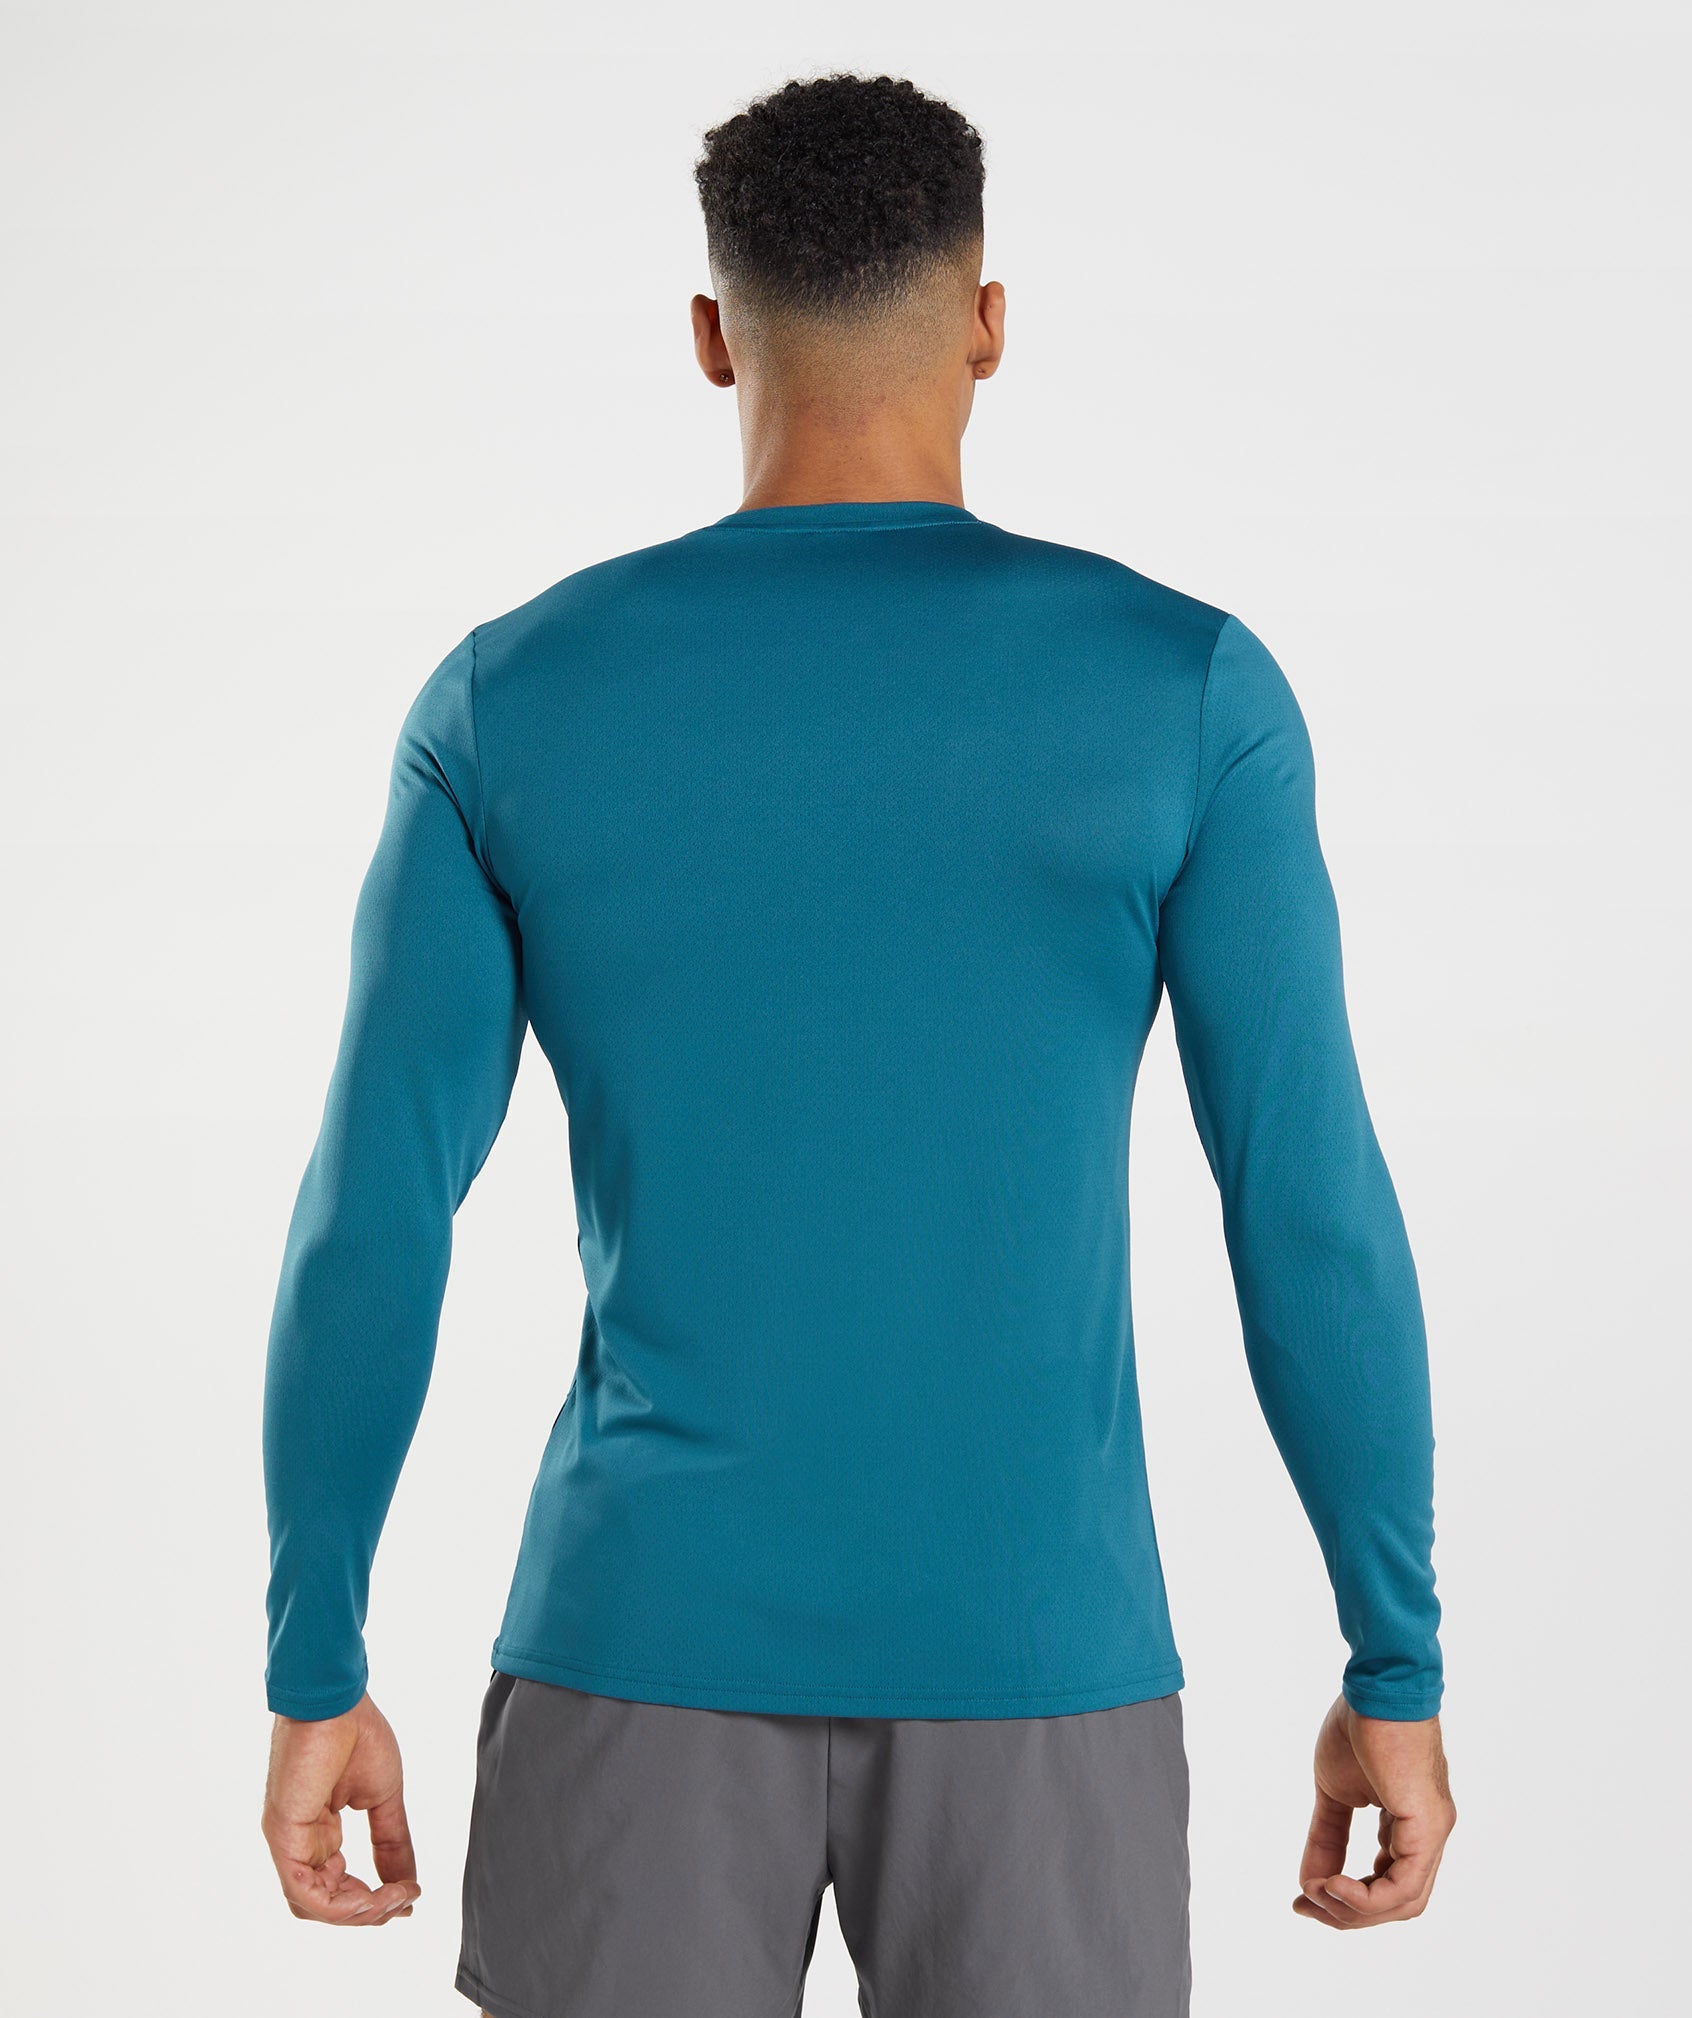 Arrival Long Sleeve T-Shirt in Atlantic Blue - view 2